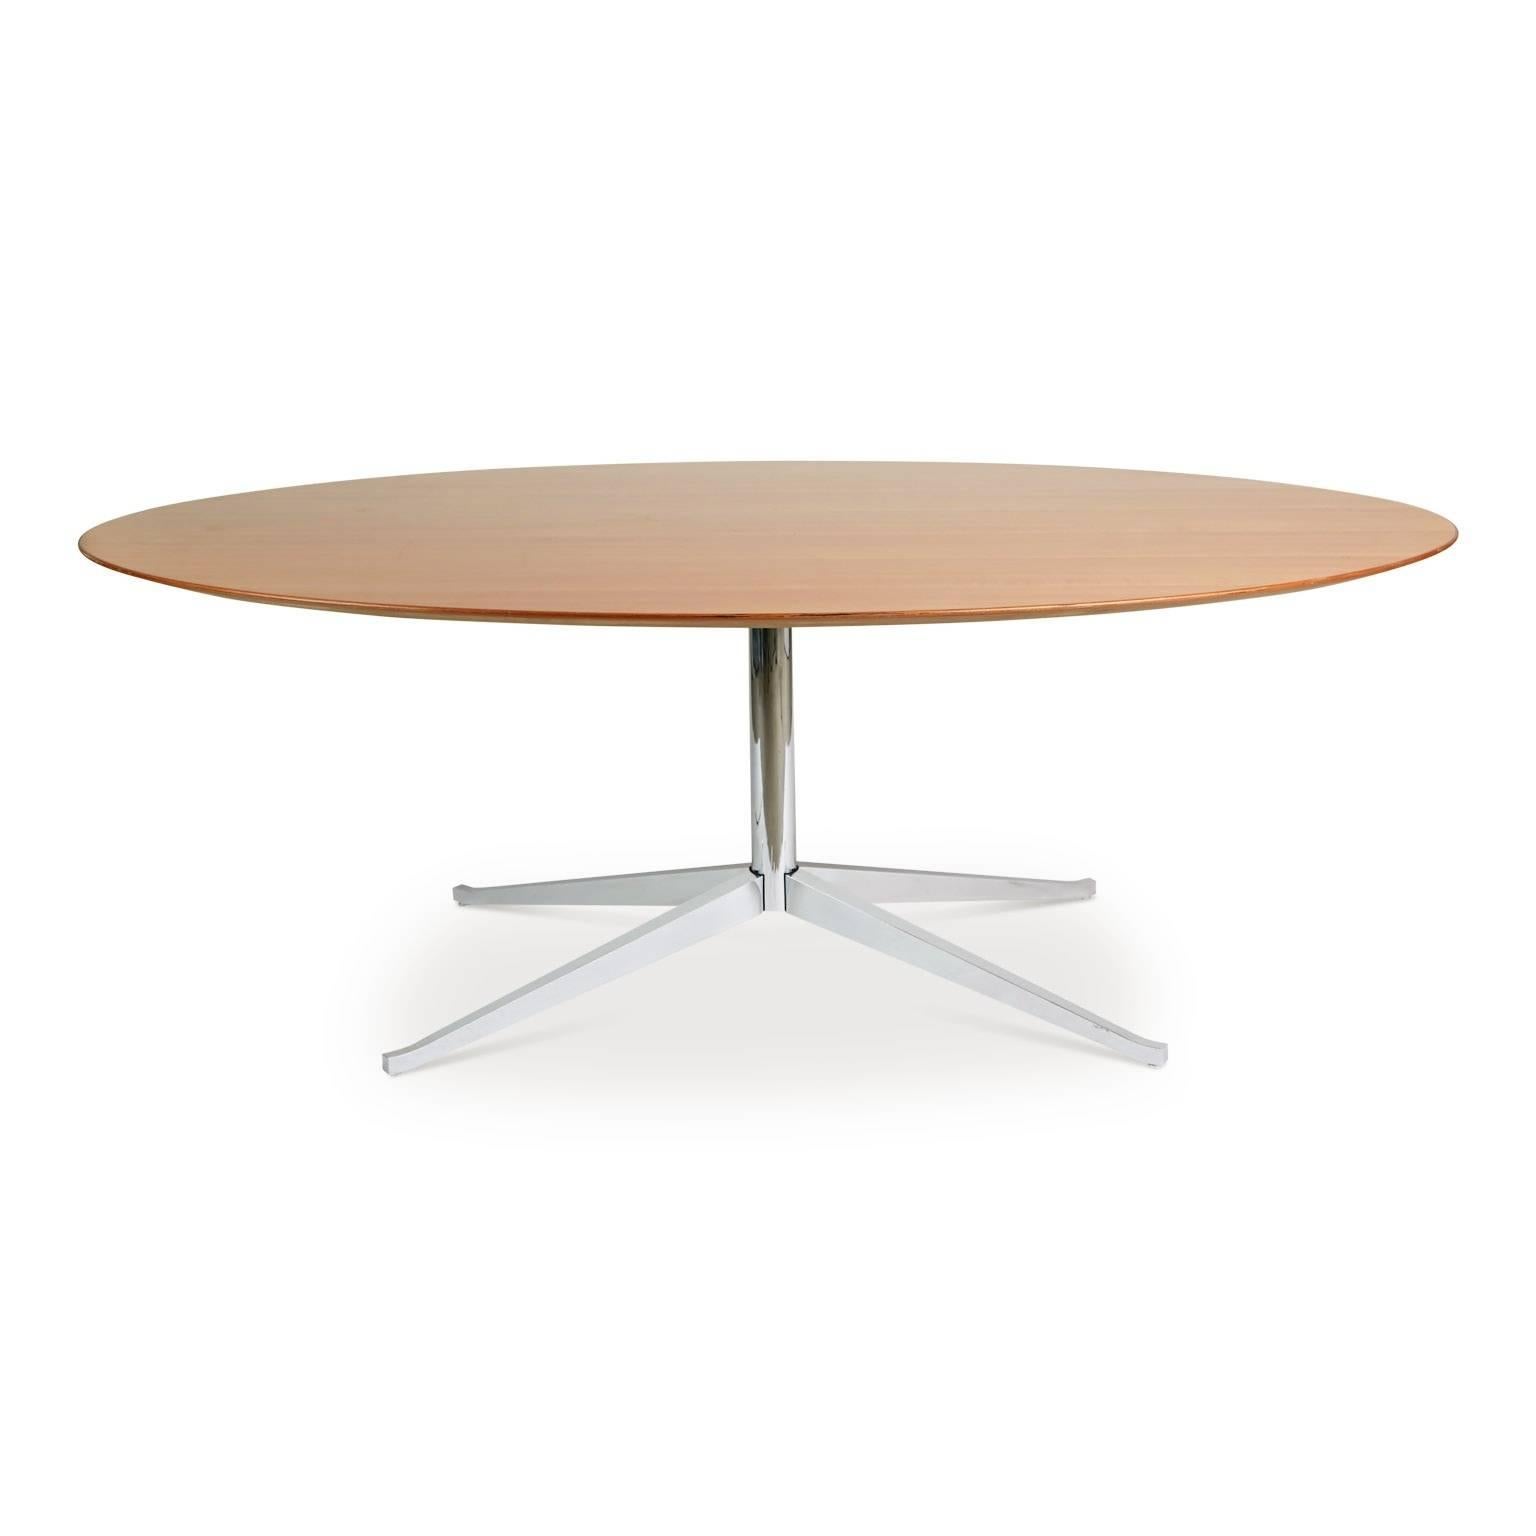 Expansive oval shaped table originally designed by Florence Knoll for Knoll International in 1961. This generously proportioned table comprises of a spacious oval shaped pearwood top finished with a knife edge. Both the frame and legs are fabricated